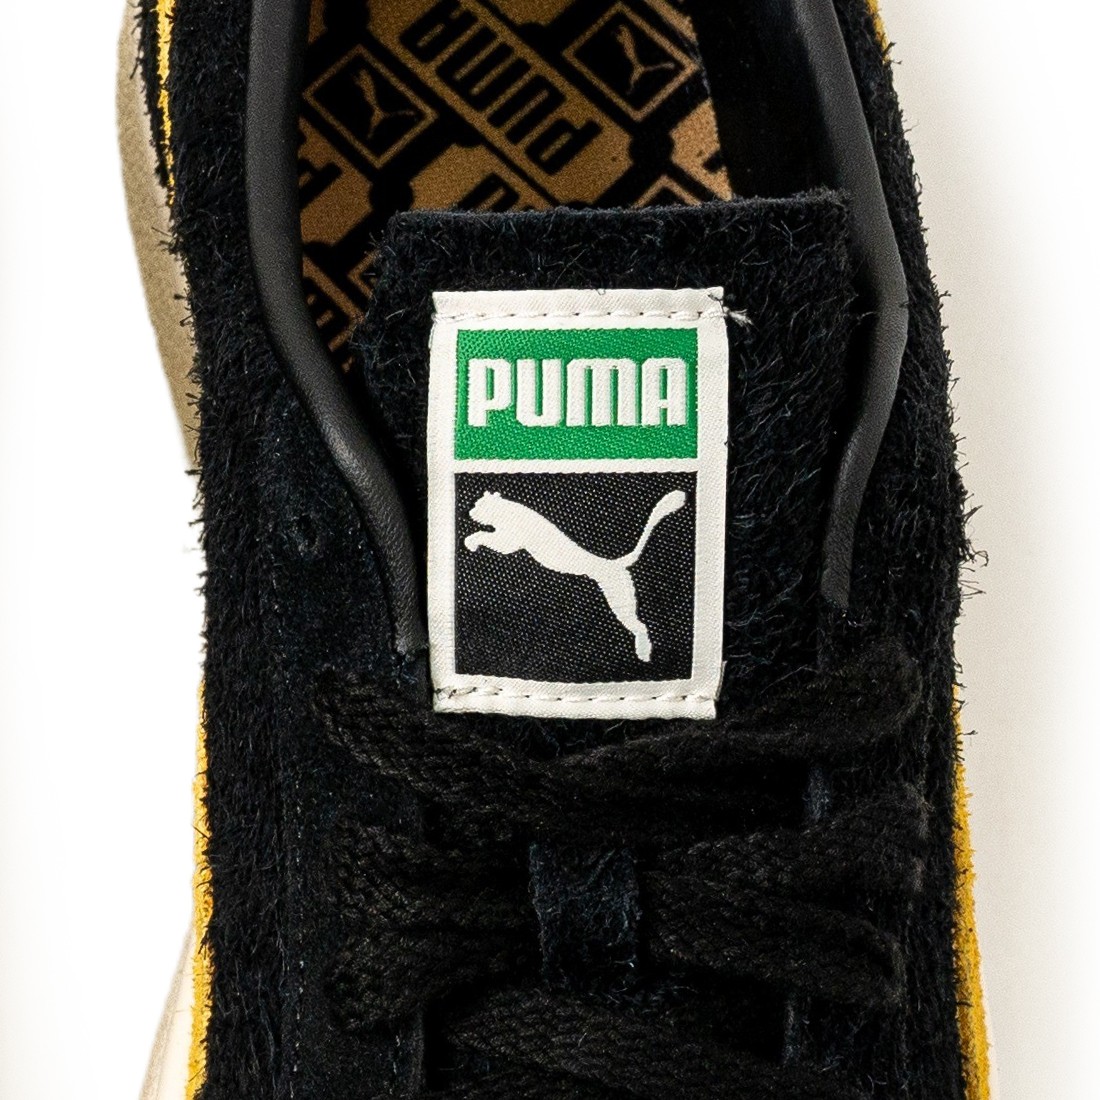 PUMA has teased the upcoming